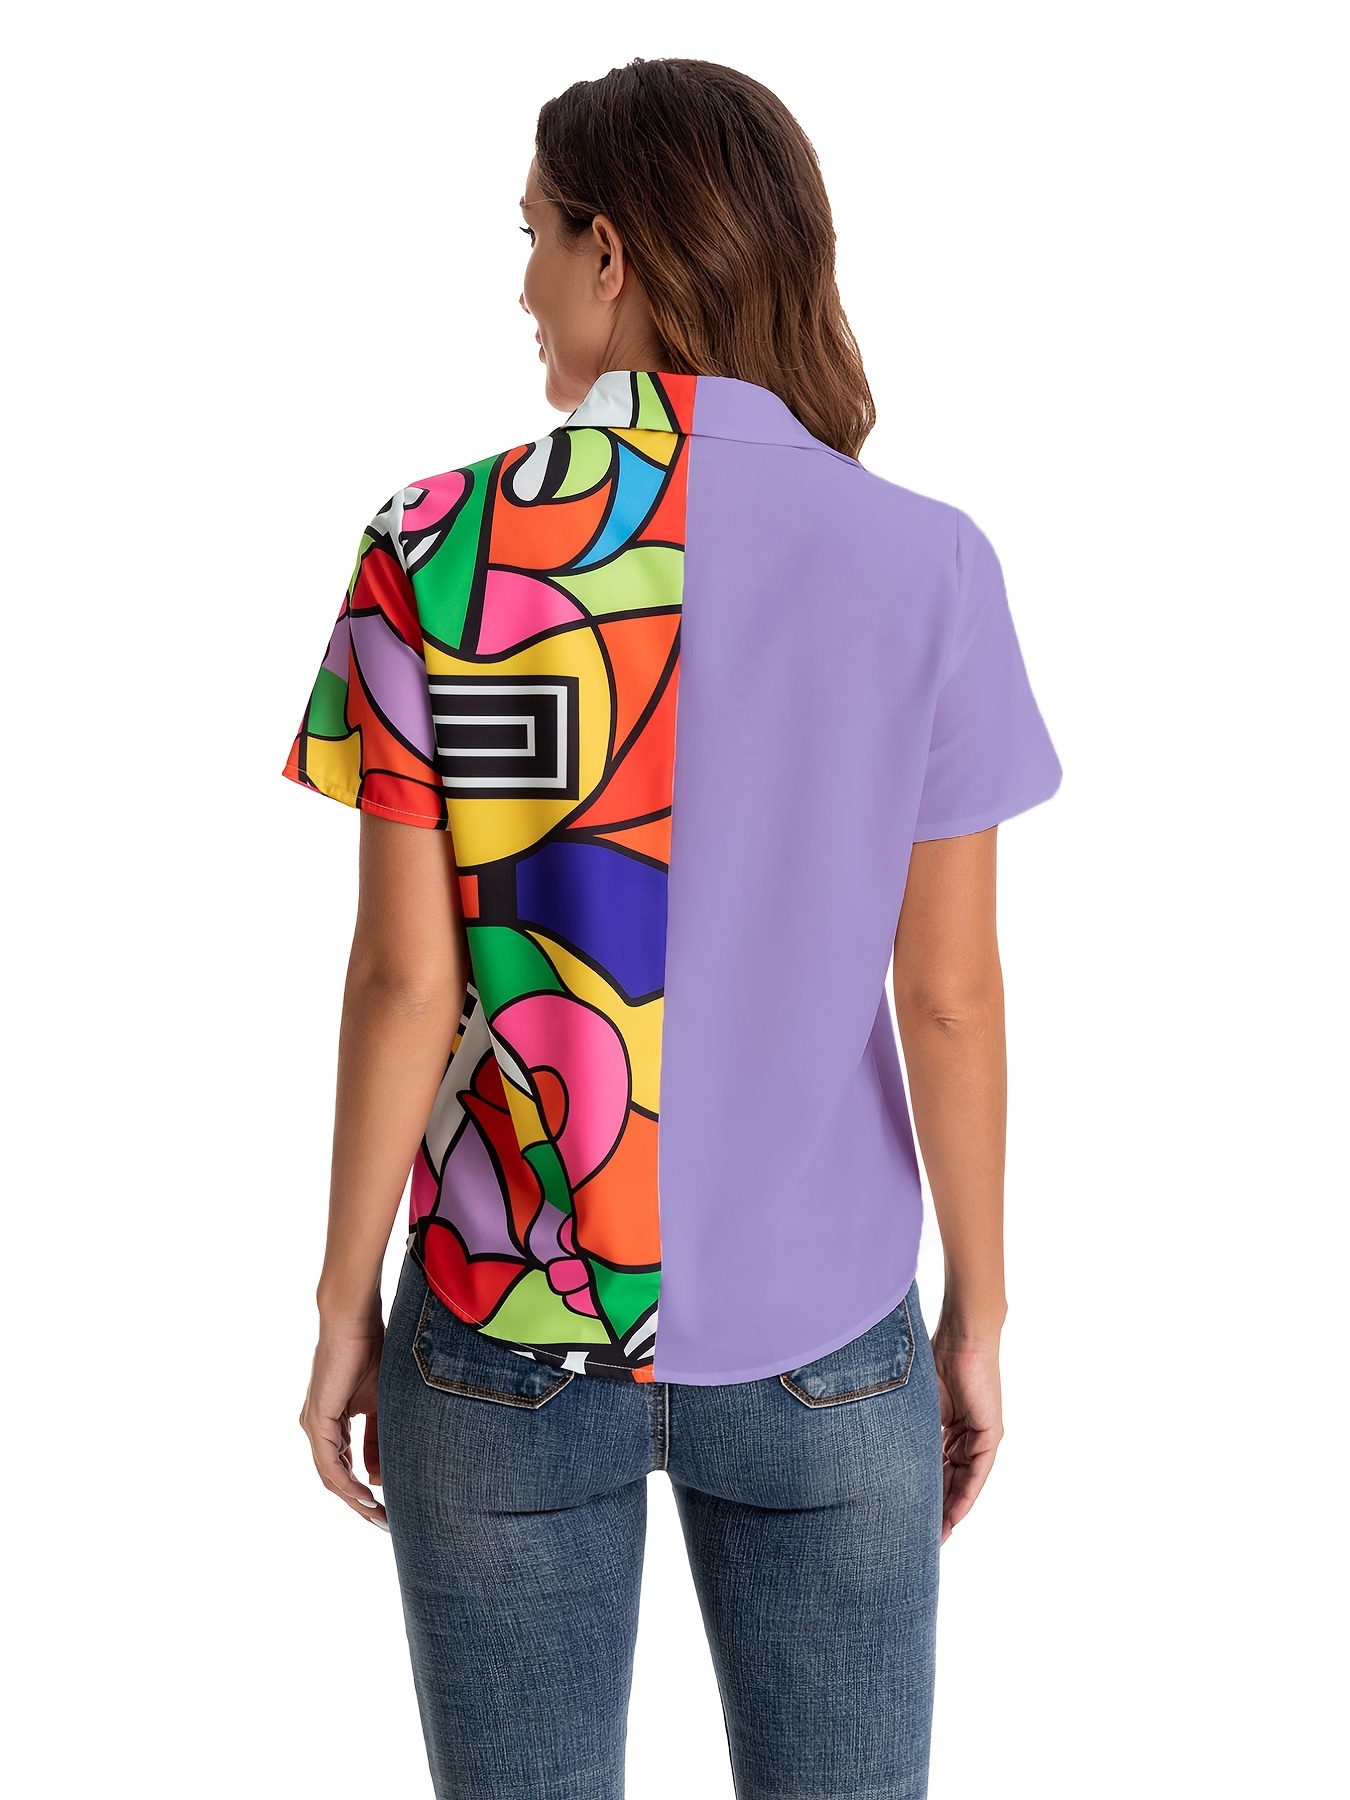  Ladies T Shirt Tops Women's Printed Patchwork Buttons